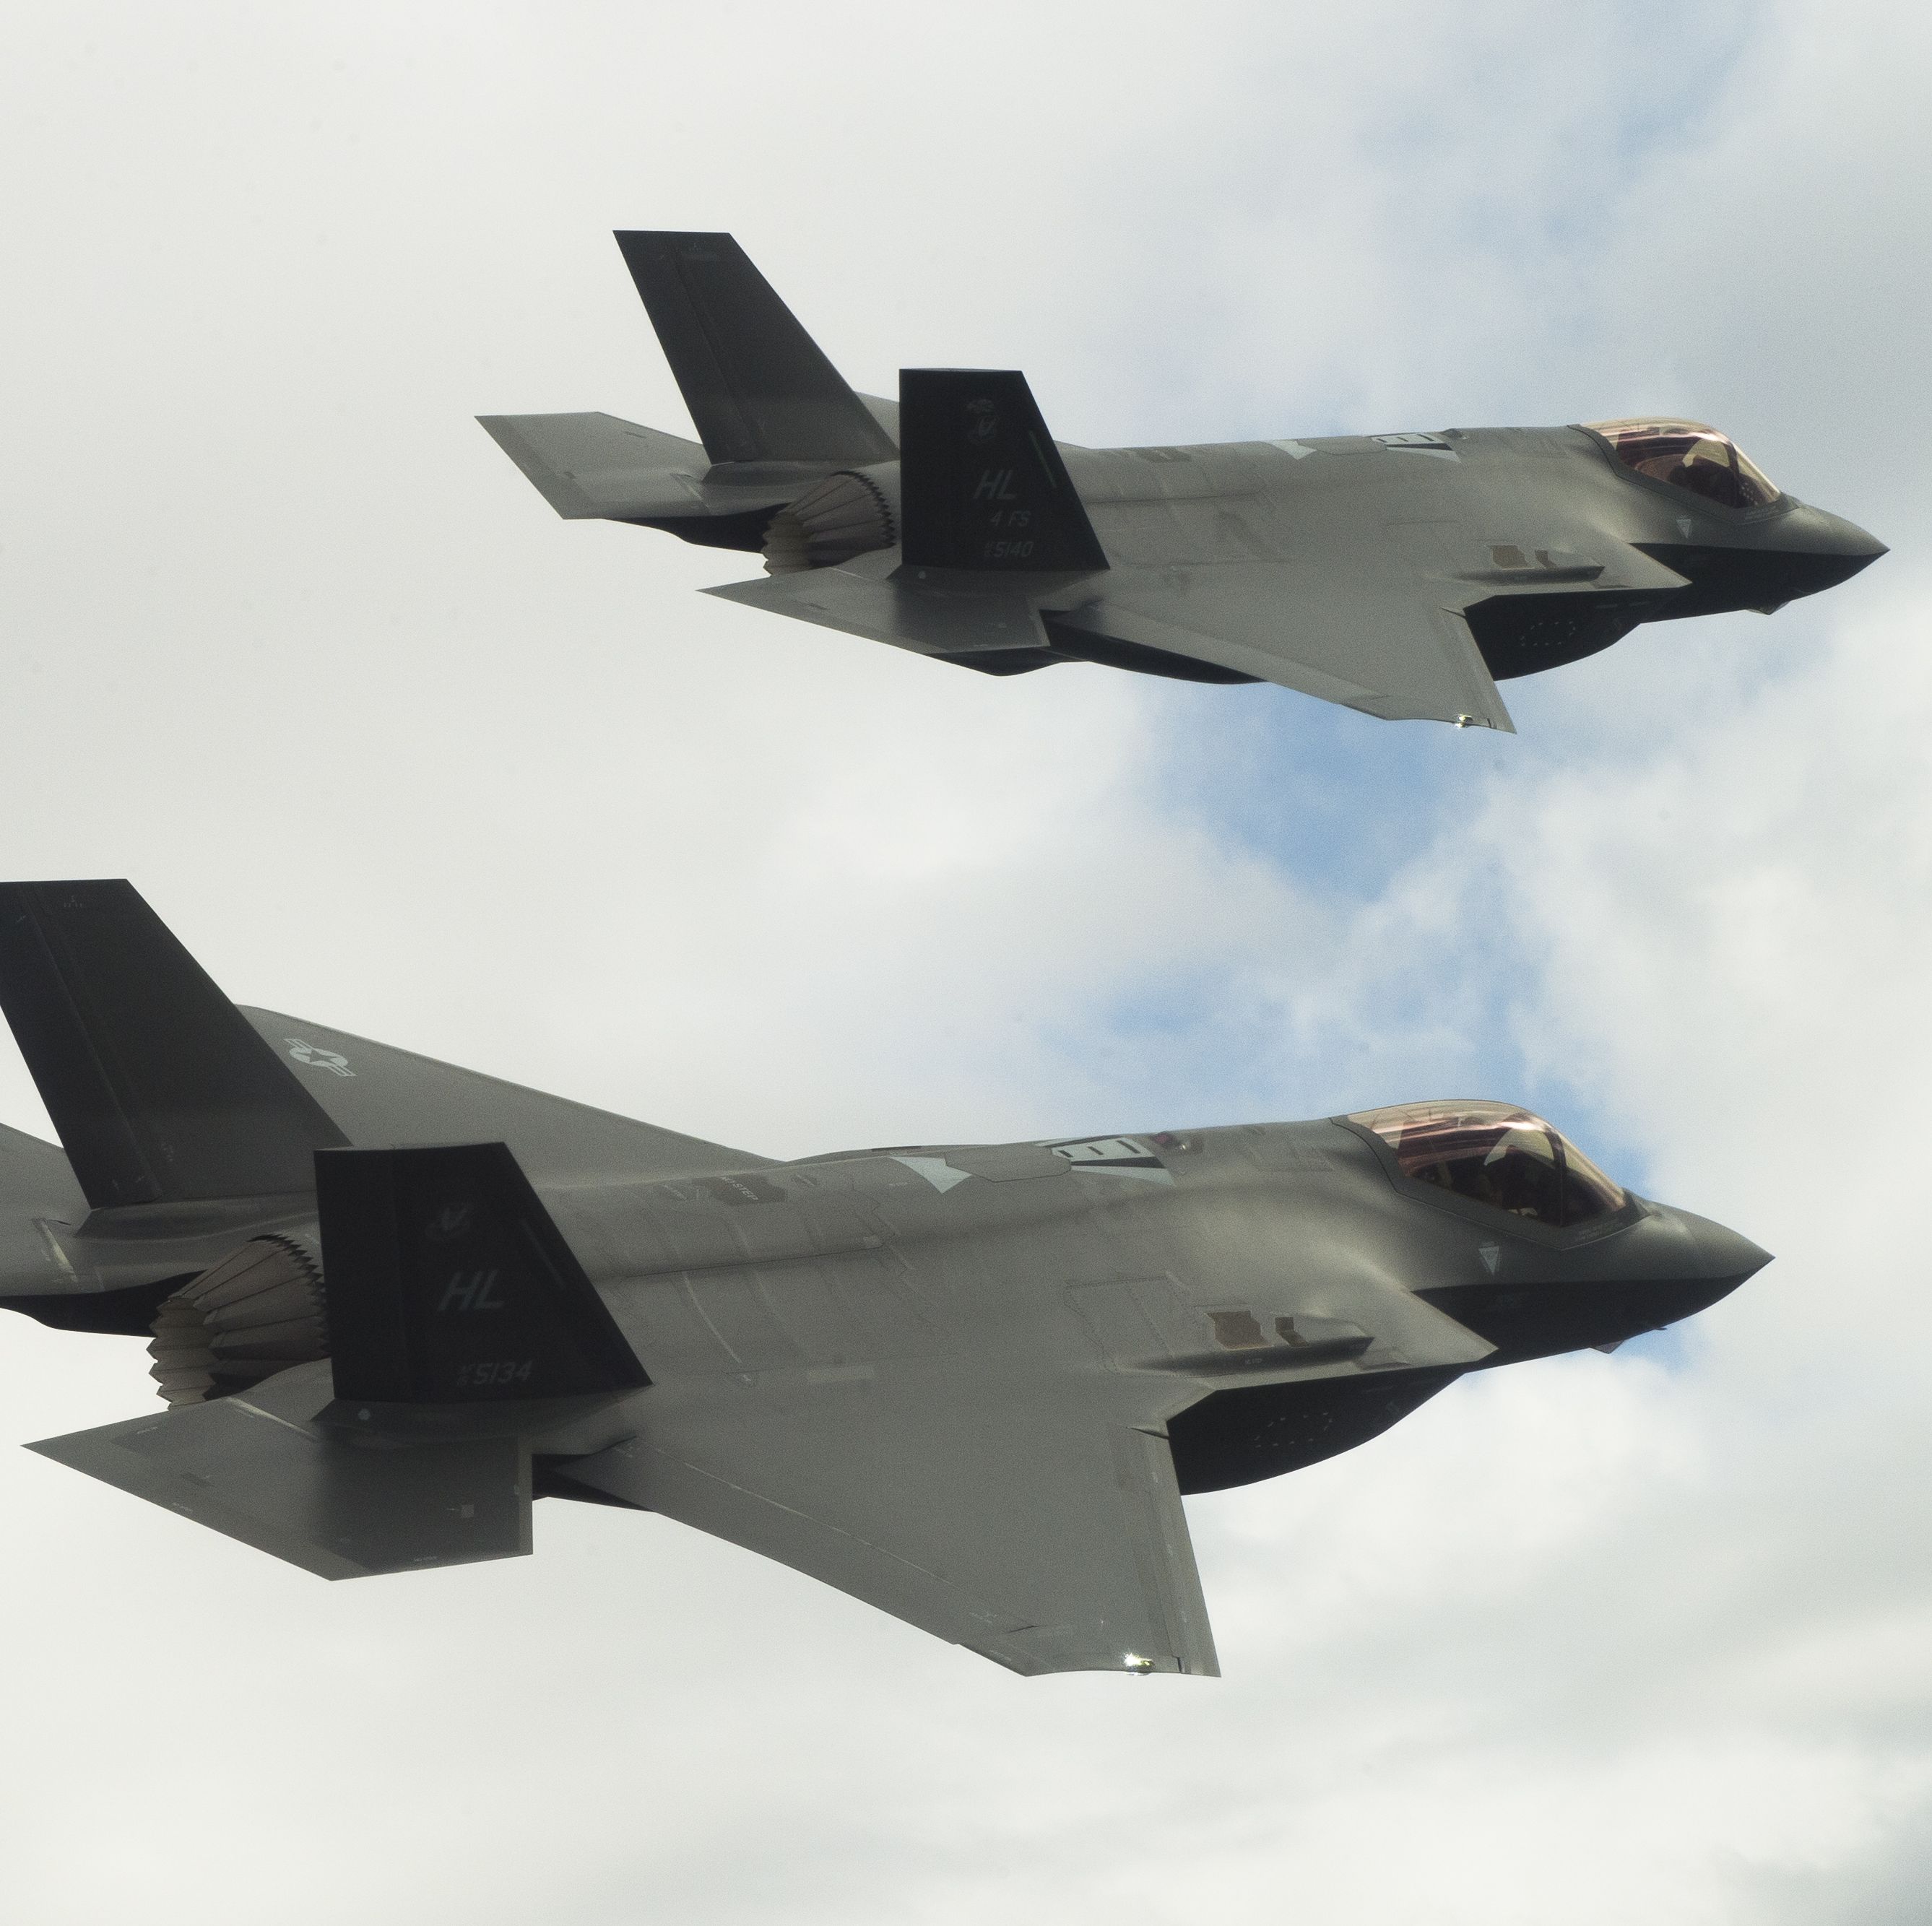 An Even More Badass Version of the F-35 Fighter Is Taking Flight